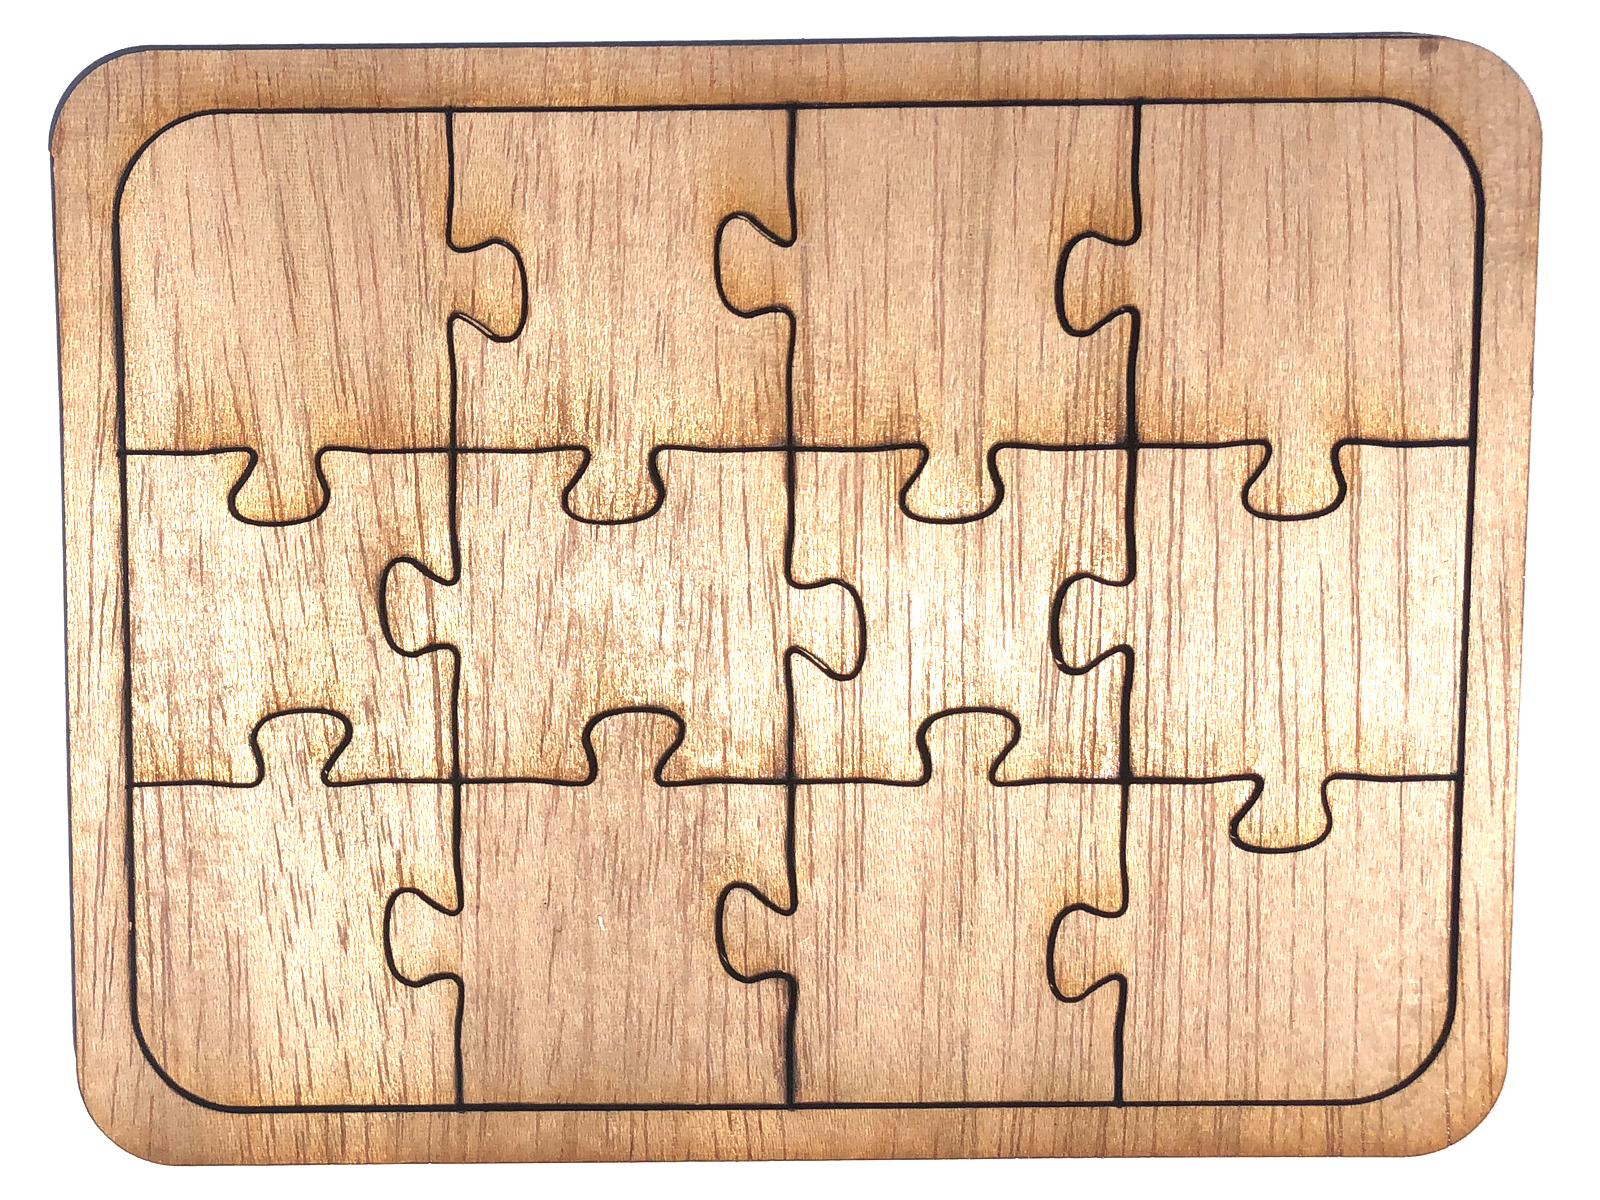 Wooden Puzzle DIY Mysterious Puzzles For Adults Children K5T2 